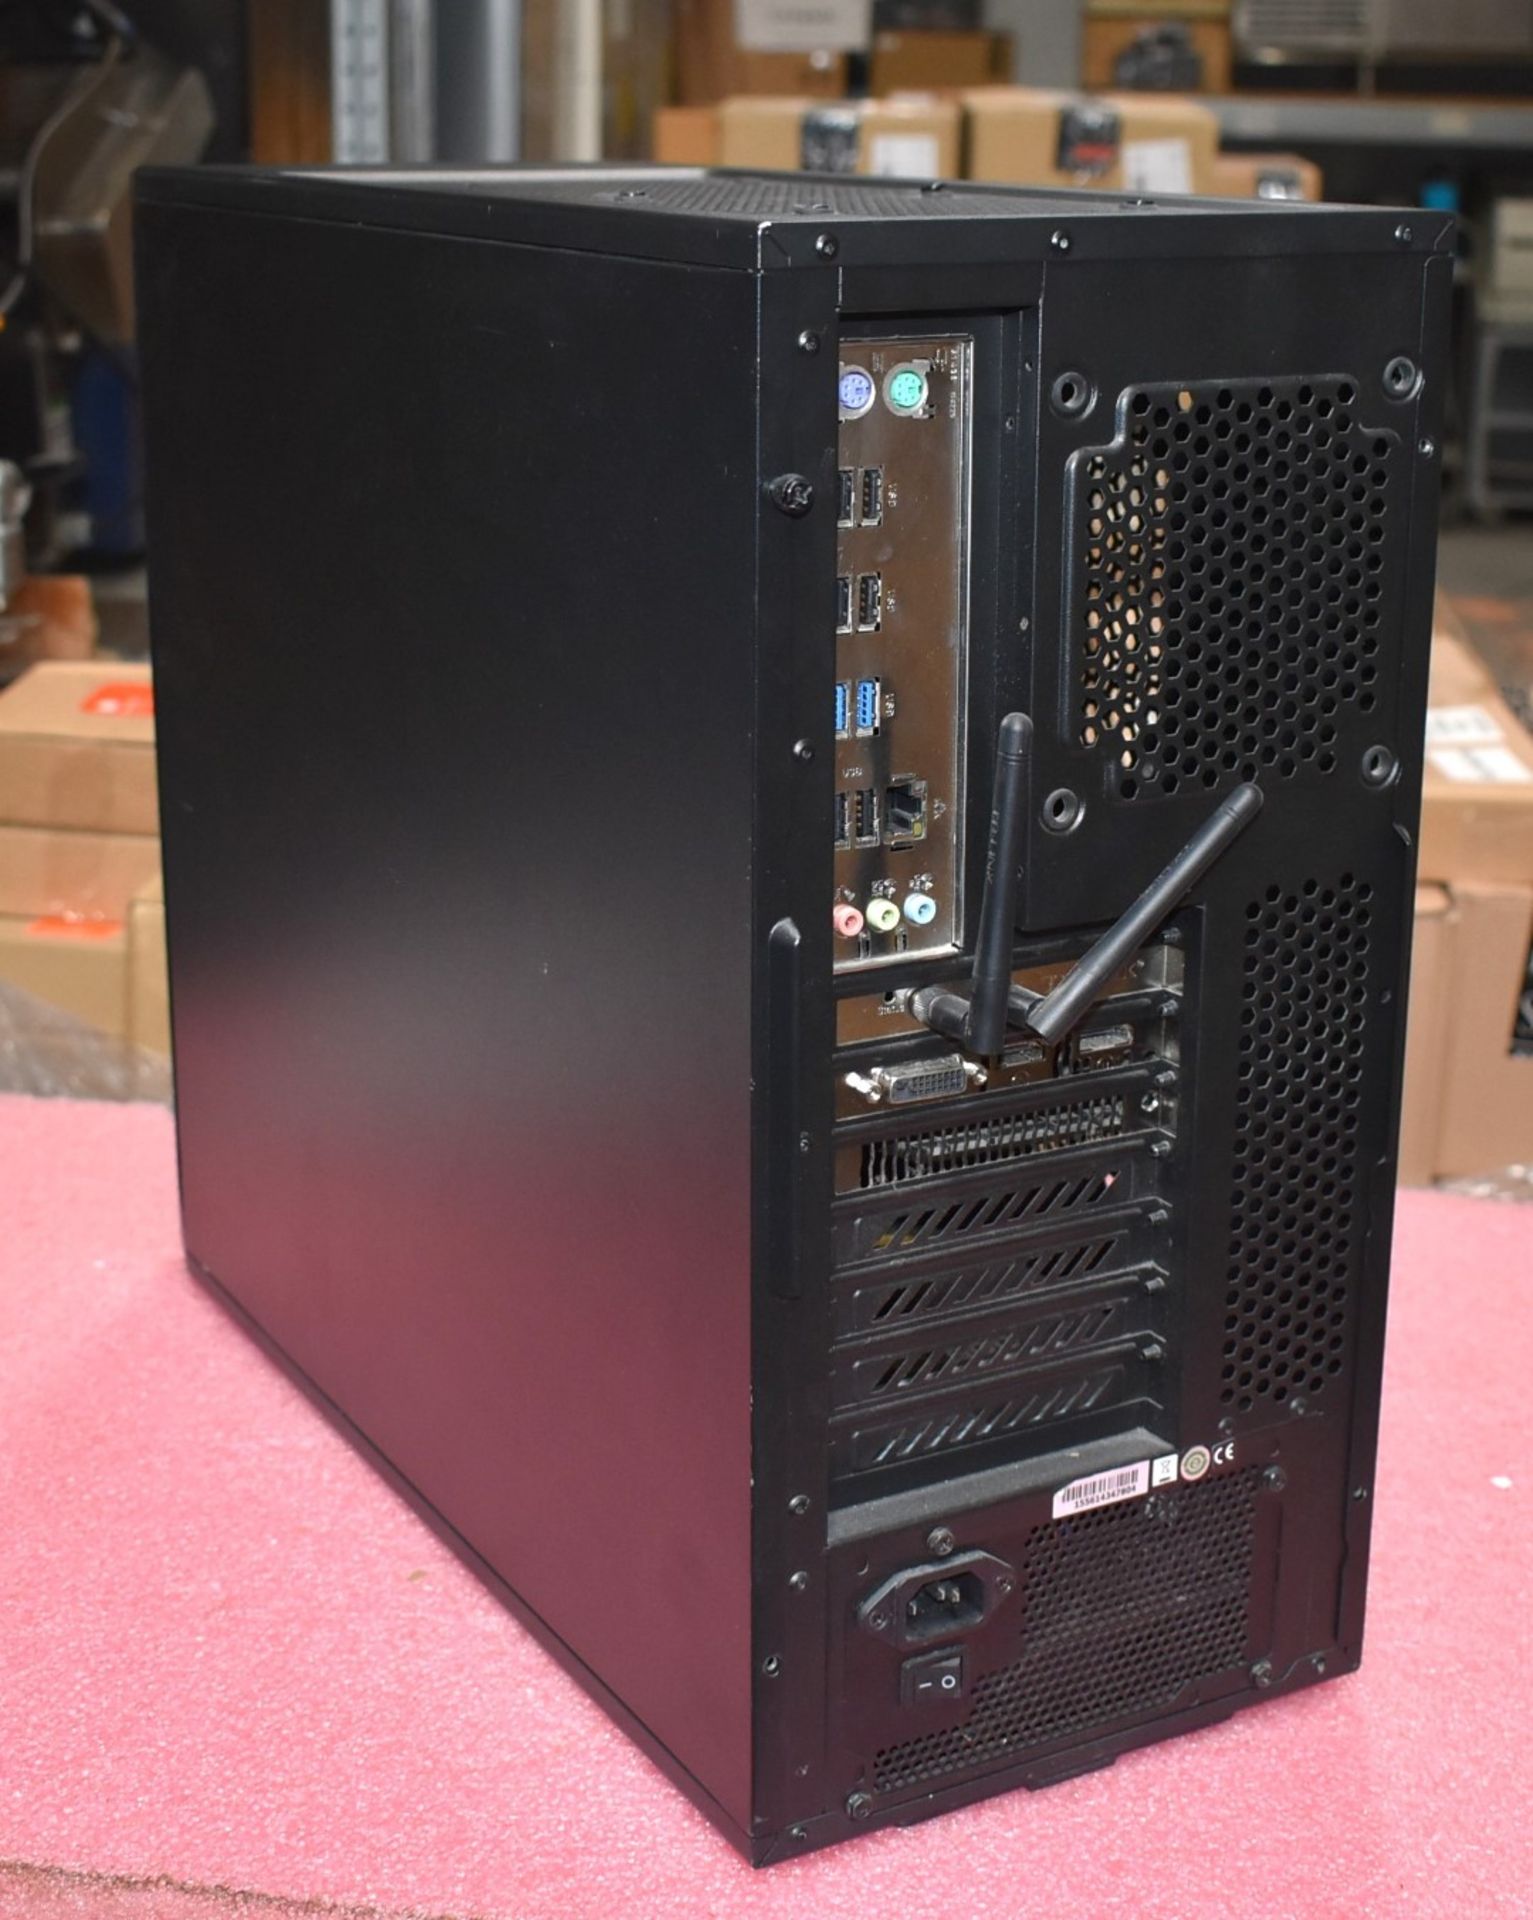 1 x Desktop Gaming PC Featuring an AMD FX6350 Processor, 8GB Ram and a GTX1050ti Graphics Card - Image 3 of 11